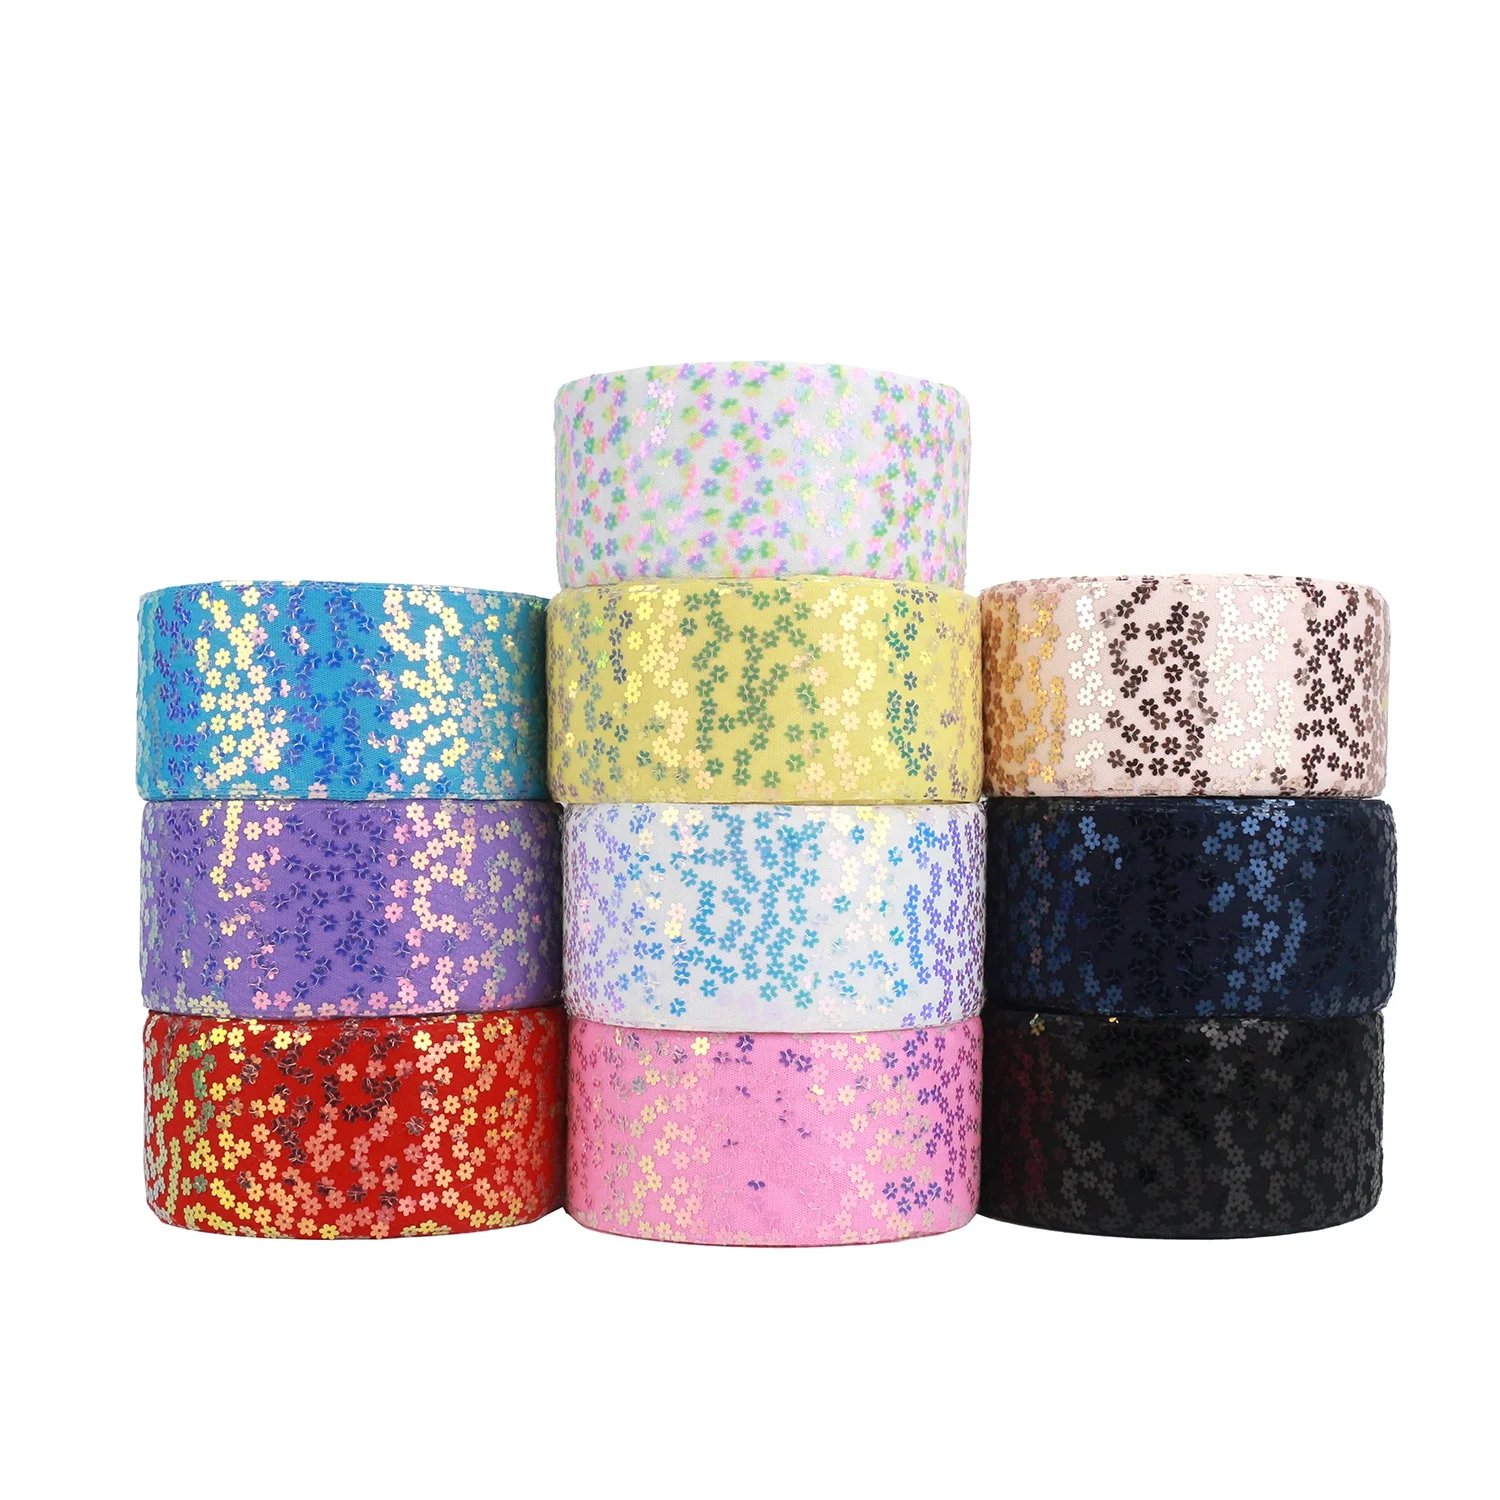 

Midi Ribbons Listones Supplies New Arrival Stock Sale Cheap 3" Flower Sequin Ribbon For Hair Accessories Bows, Picture/customized